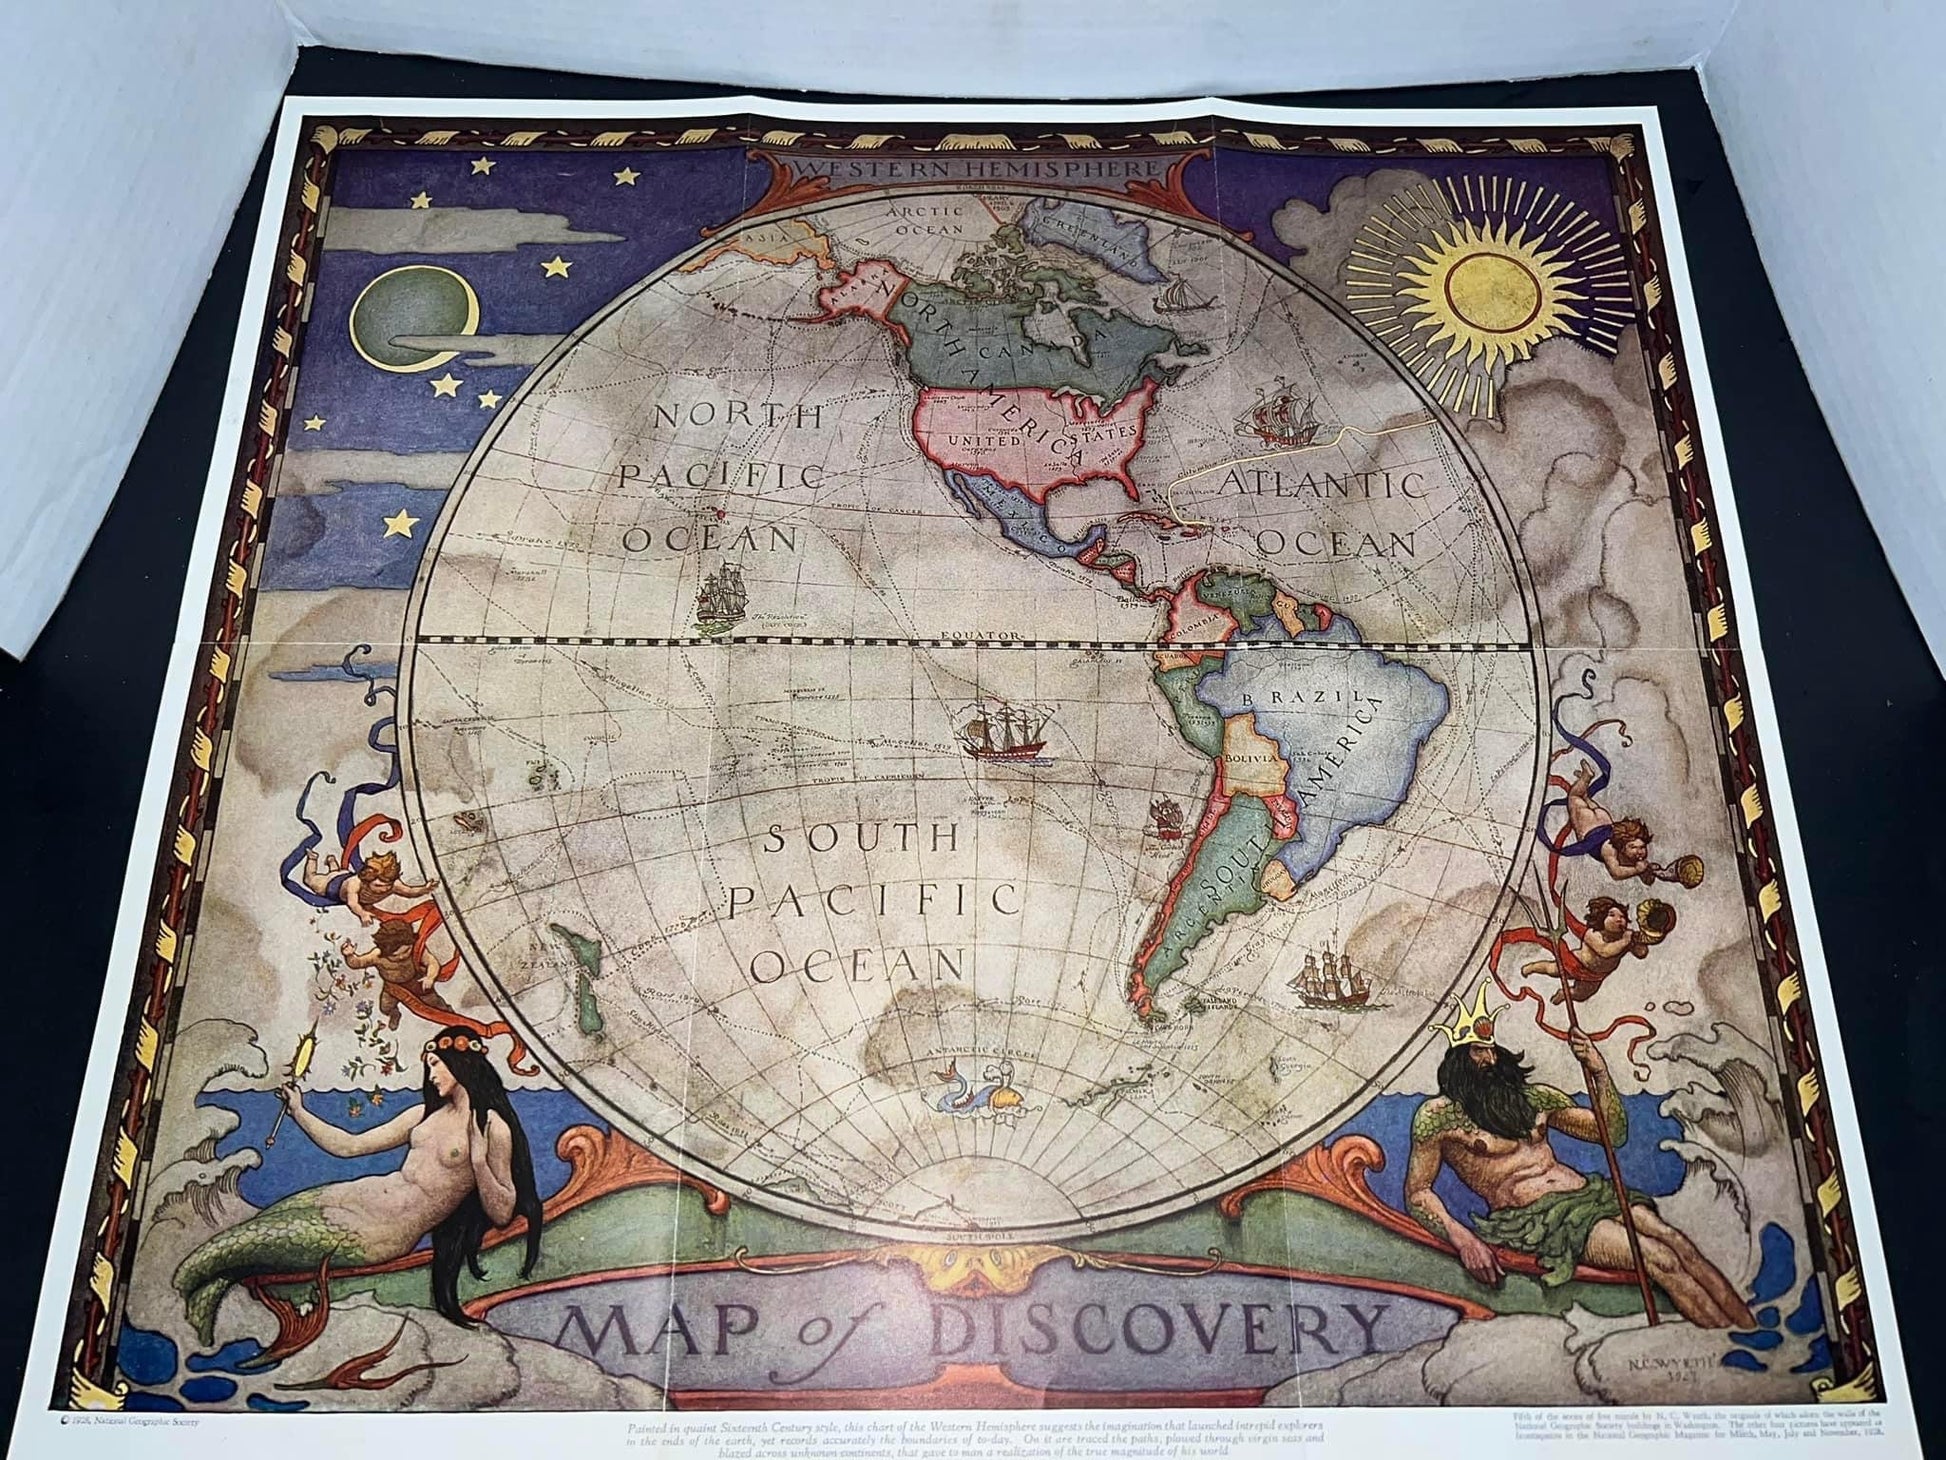 Antique Art deco 1928 — NC Wyeth Map of discovery